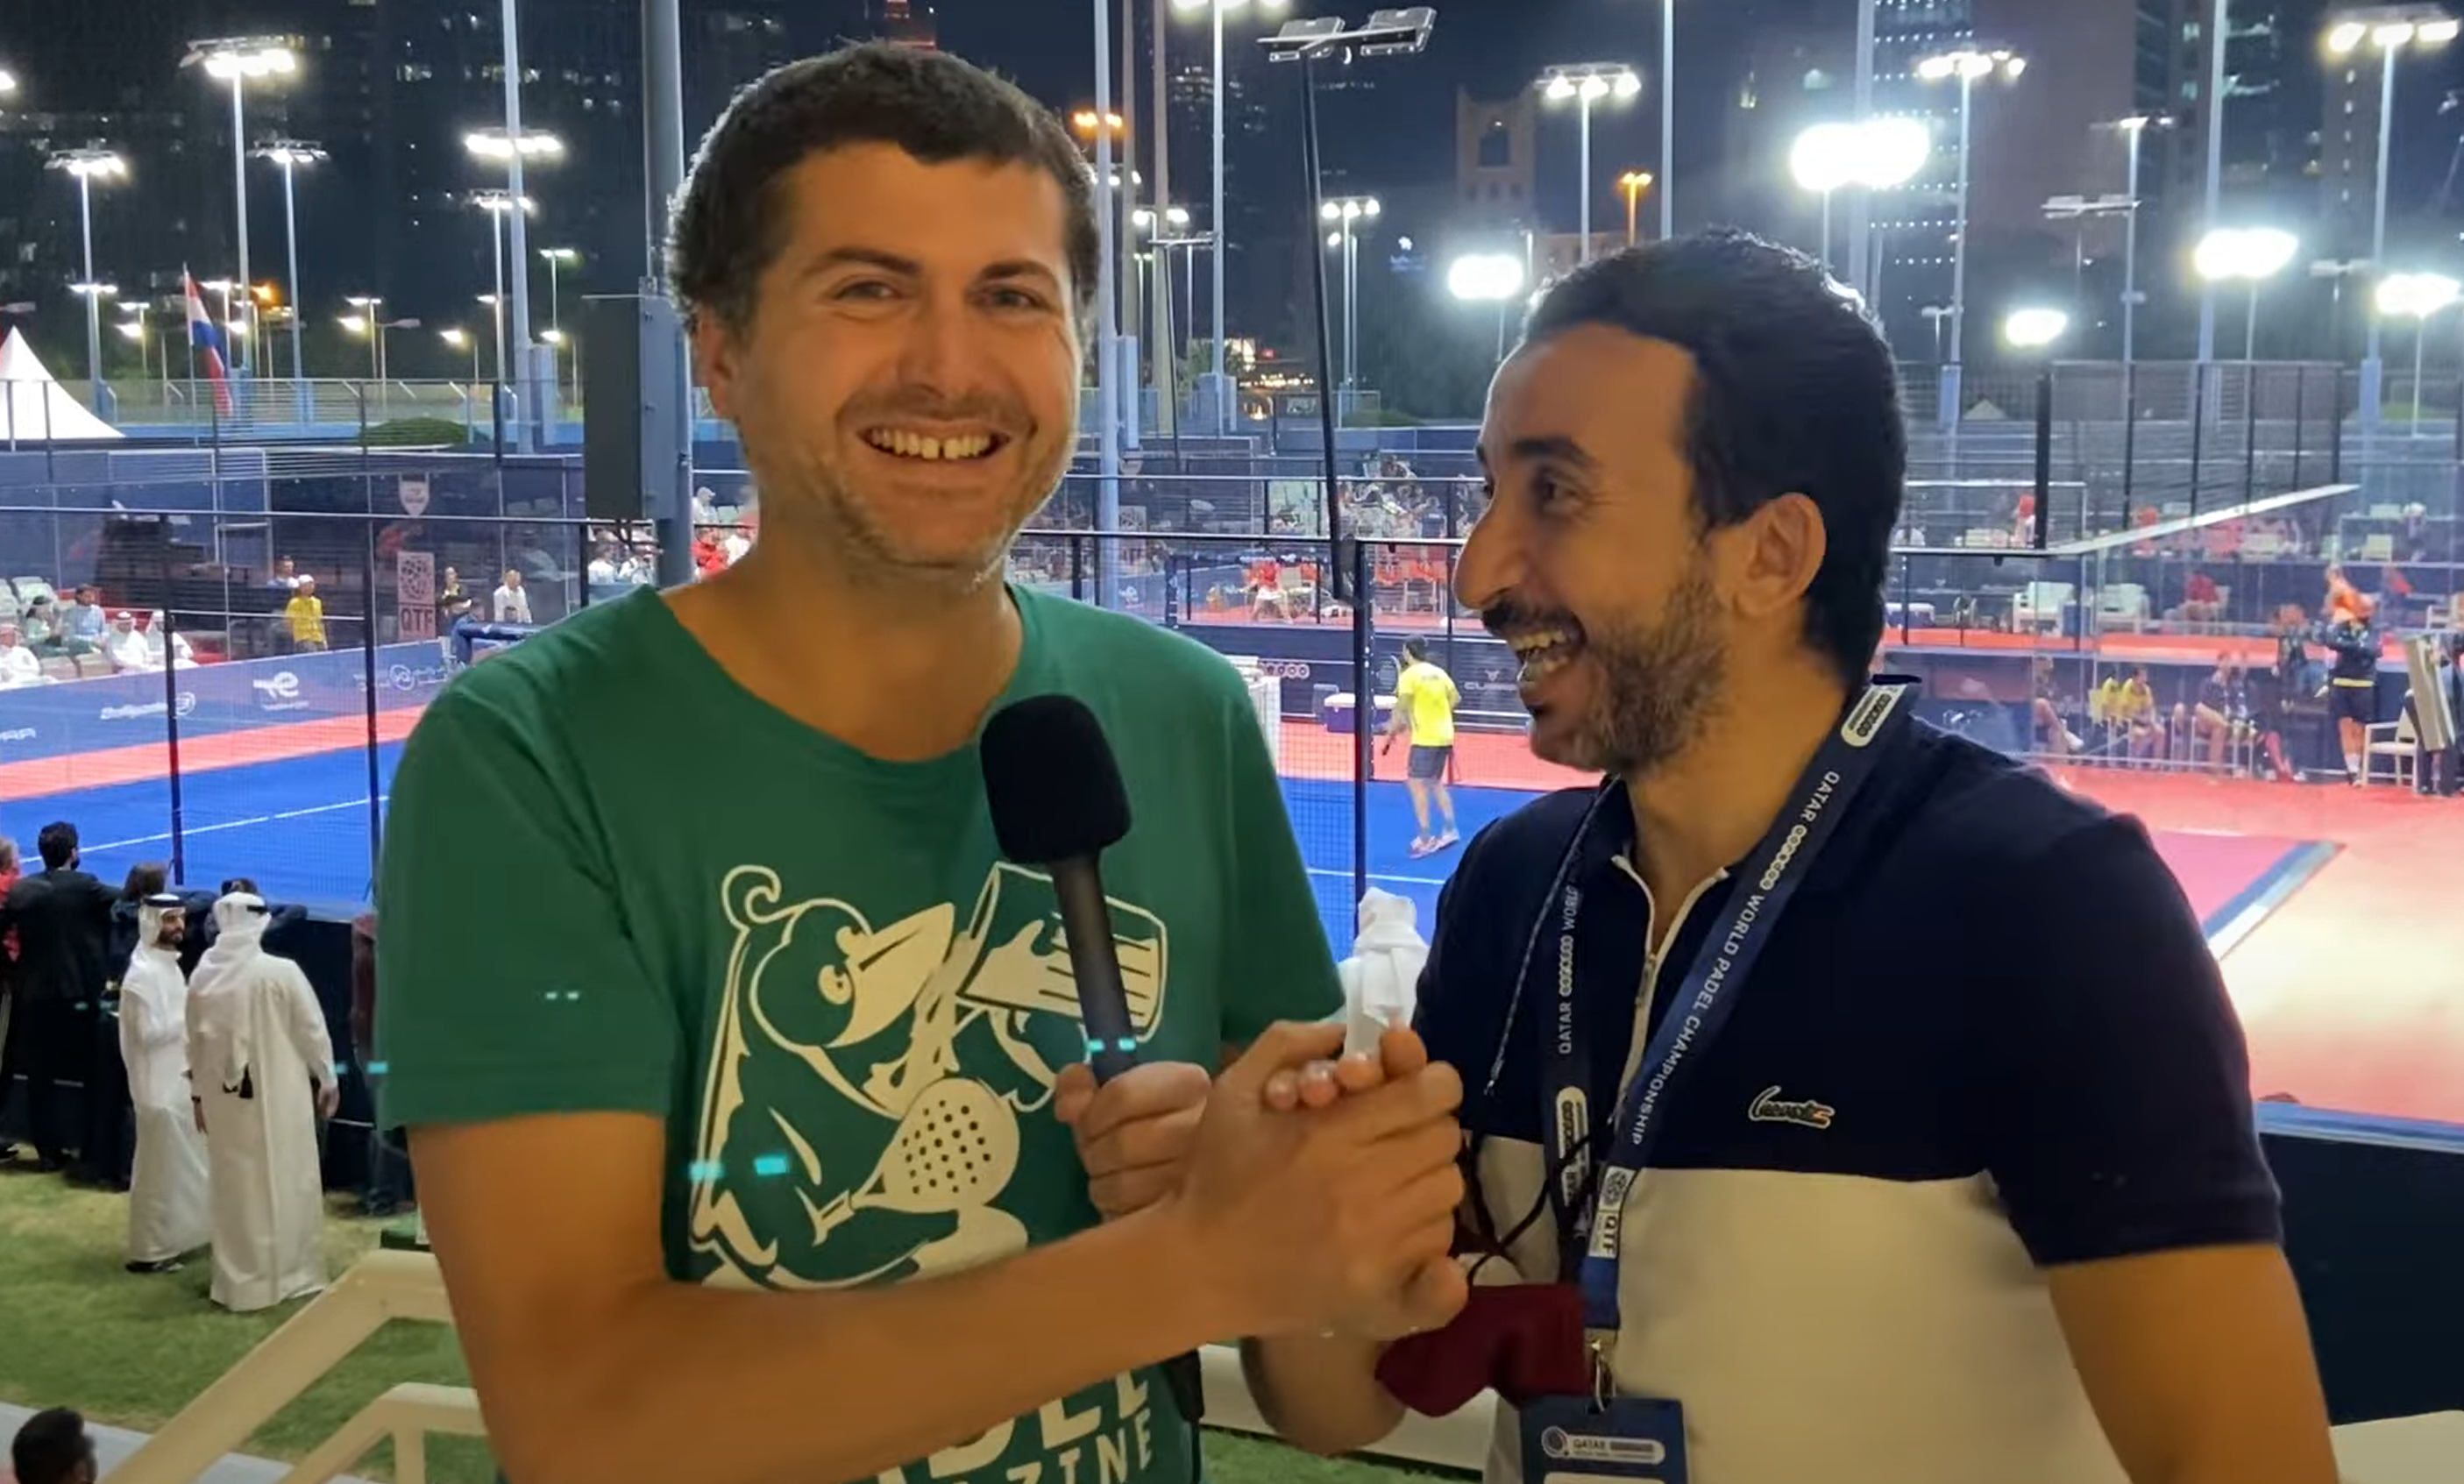 Ahmed Ghatwary: “Egypt has enormous potential in padel"